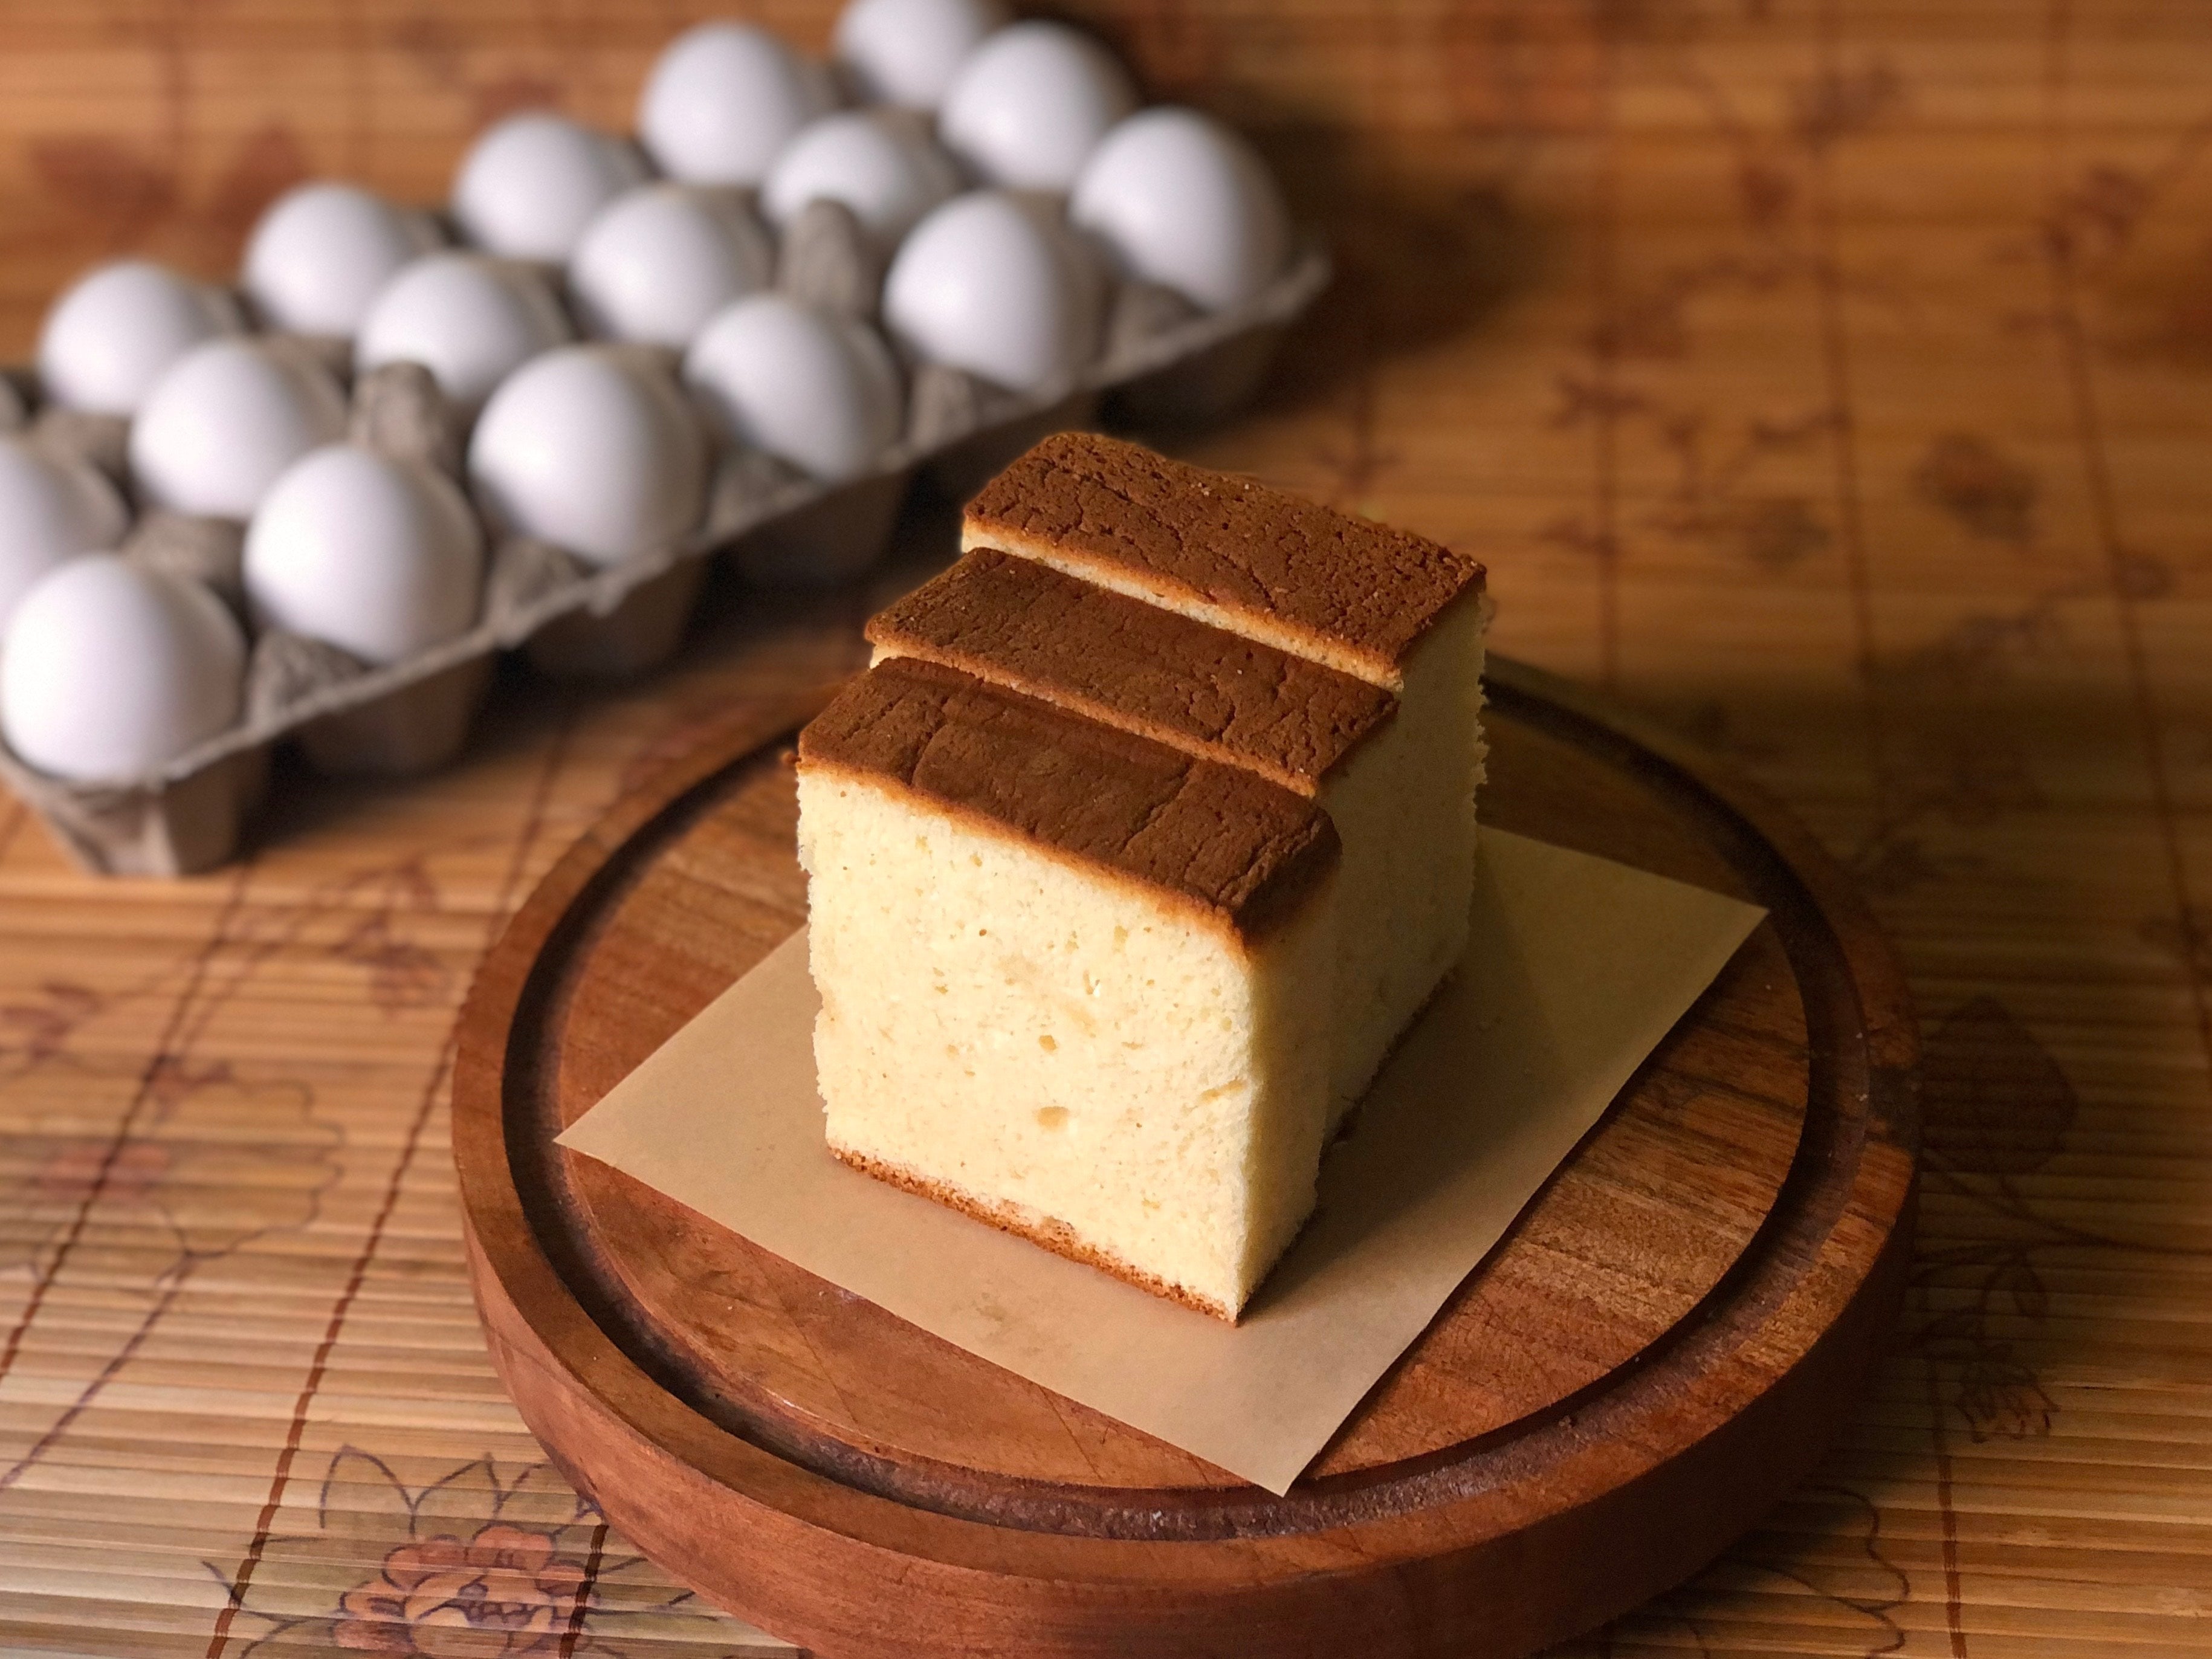 Japanese Cheesecake: Where To Find It And How To Make It - NDTV Food